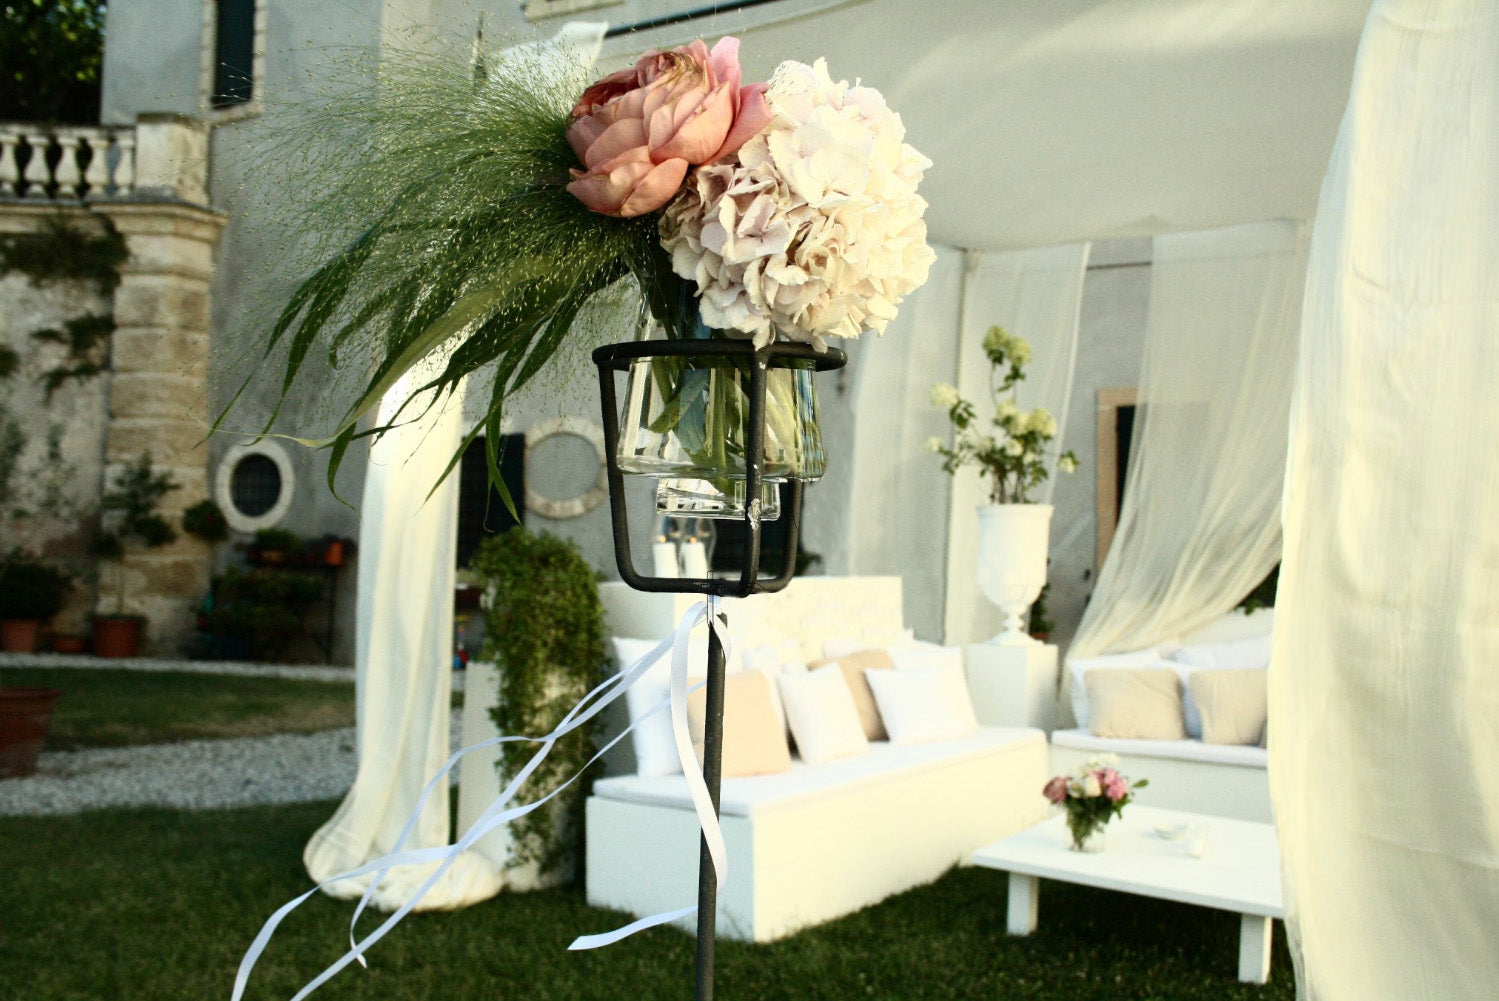 A wedding venue with white and pink floral arrangements decor.